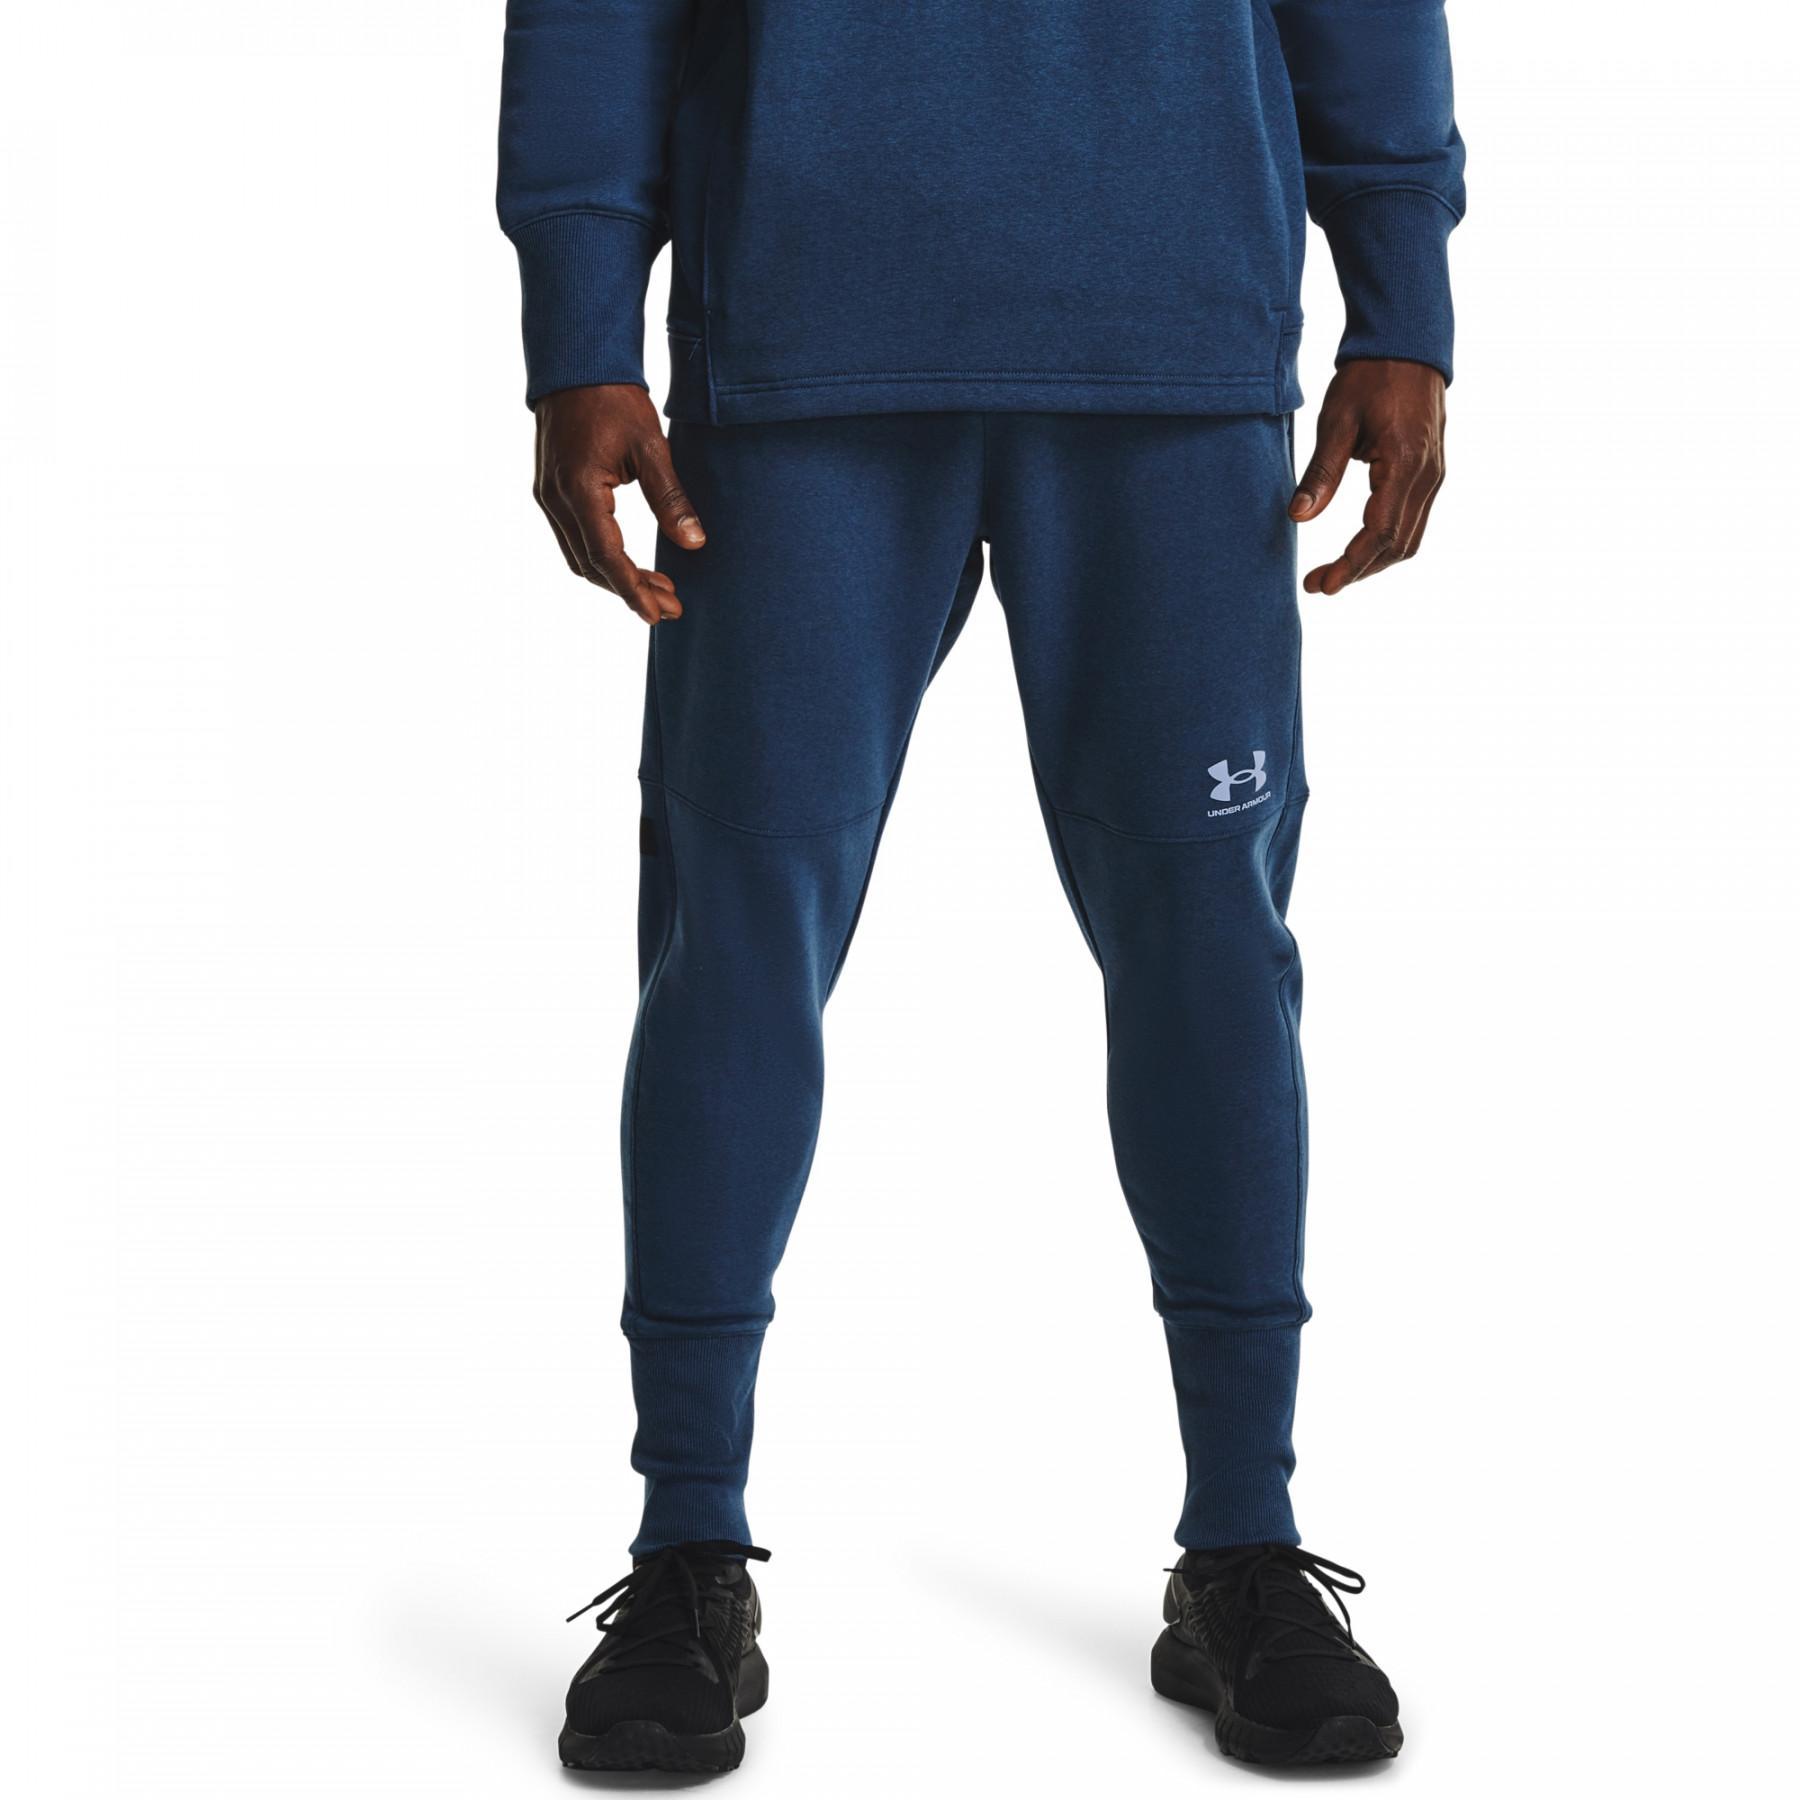 Joggingbyxa Under Armour Accelerate Off-Pitch